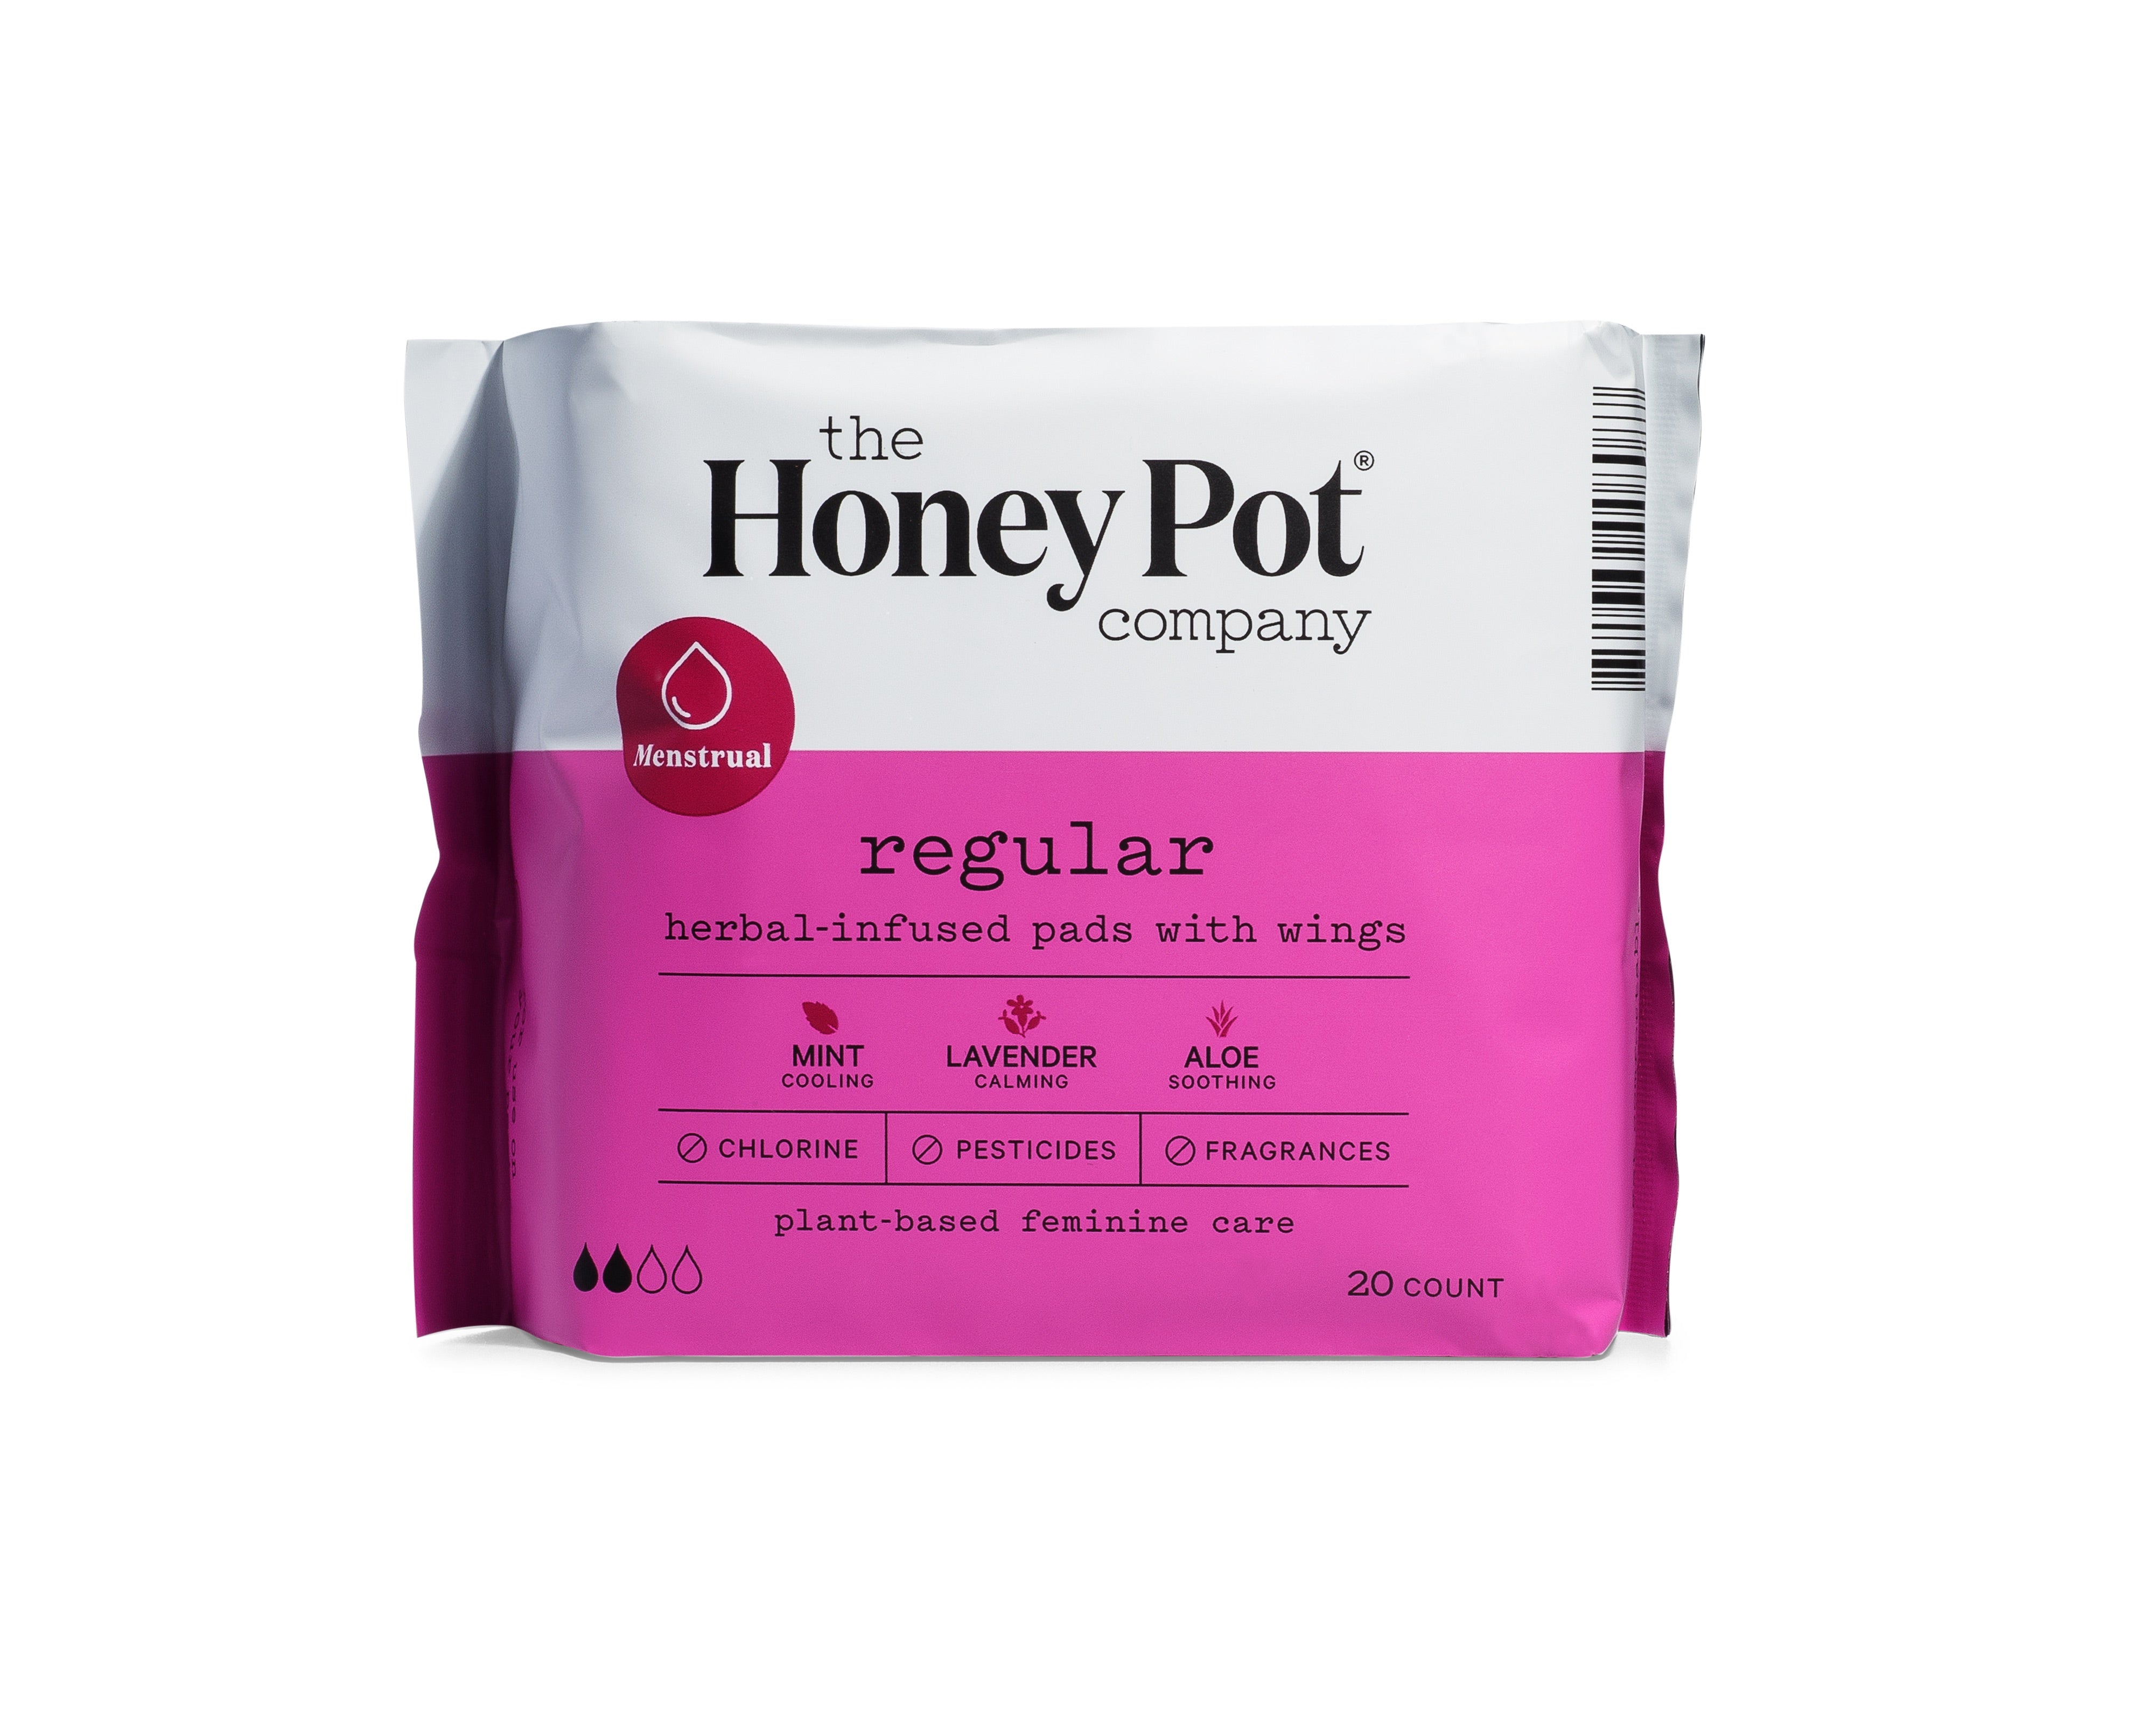 Honey Pot Regular Herbal Infused Pads with Wings 20 CT